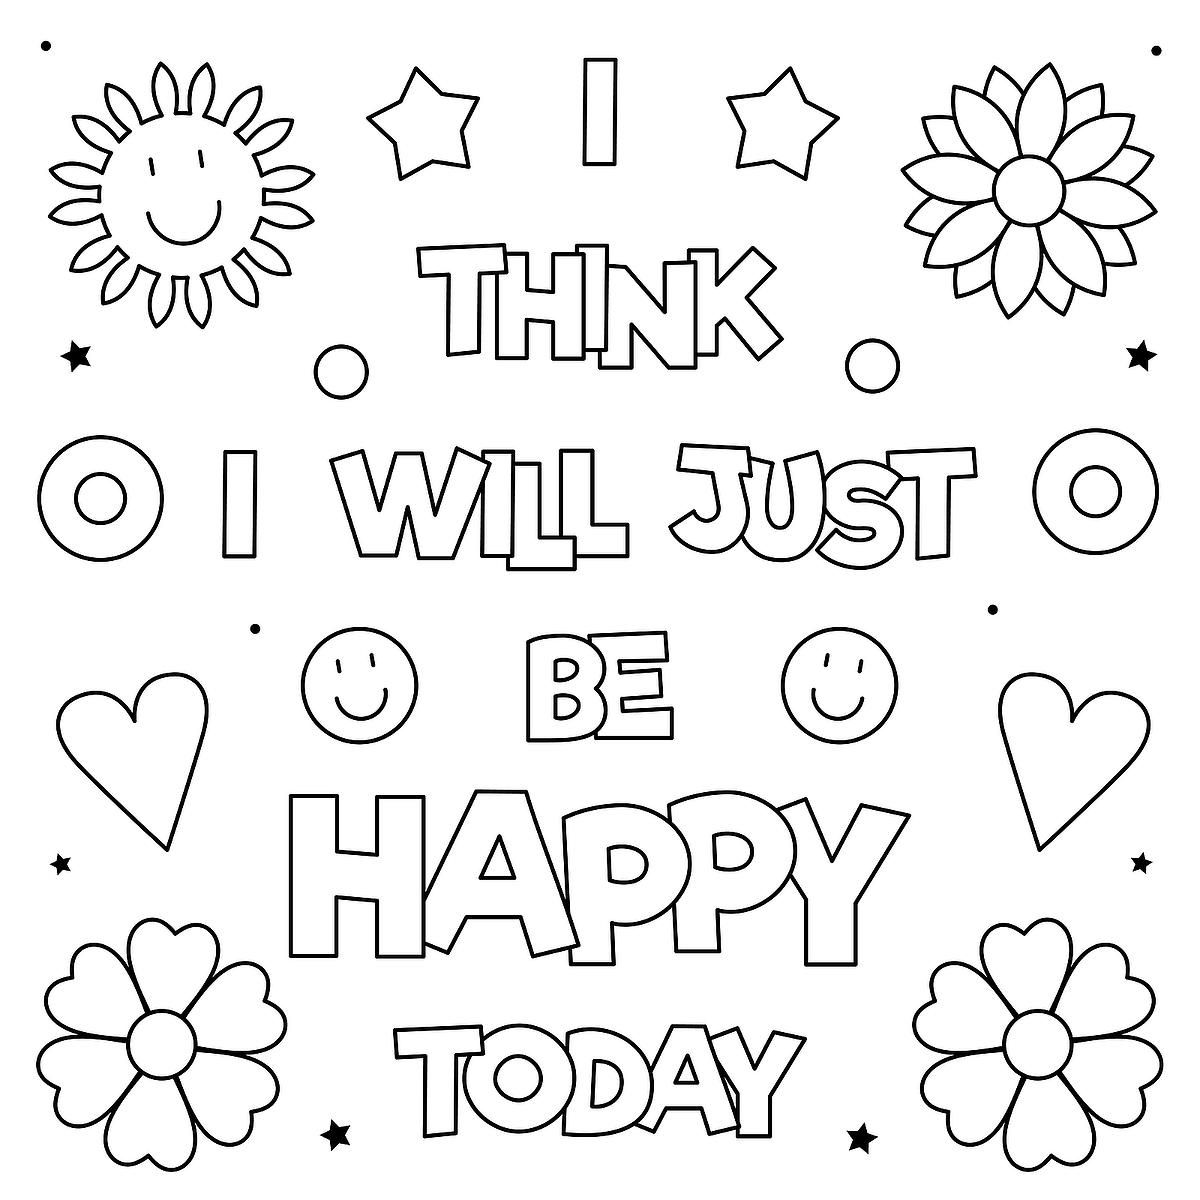 Pin on Coloring pages inspirational